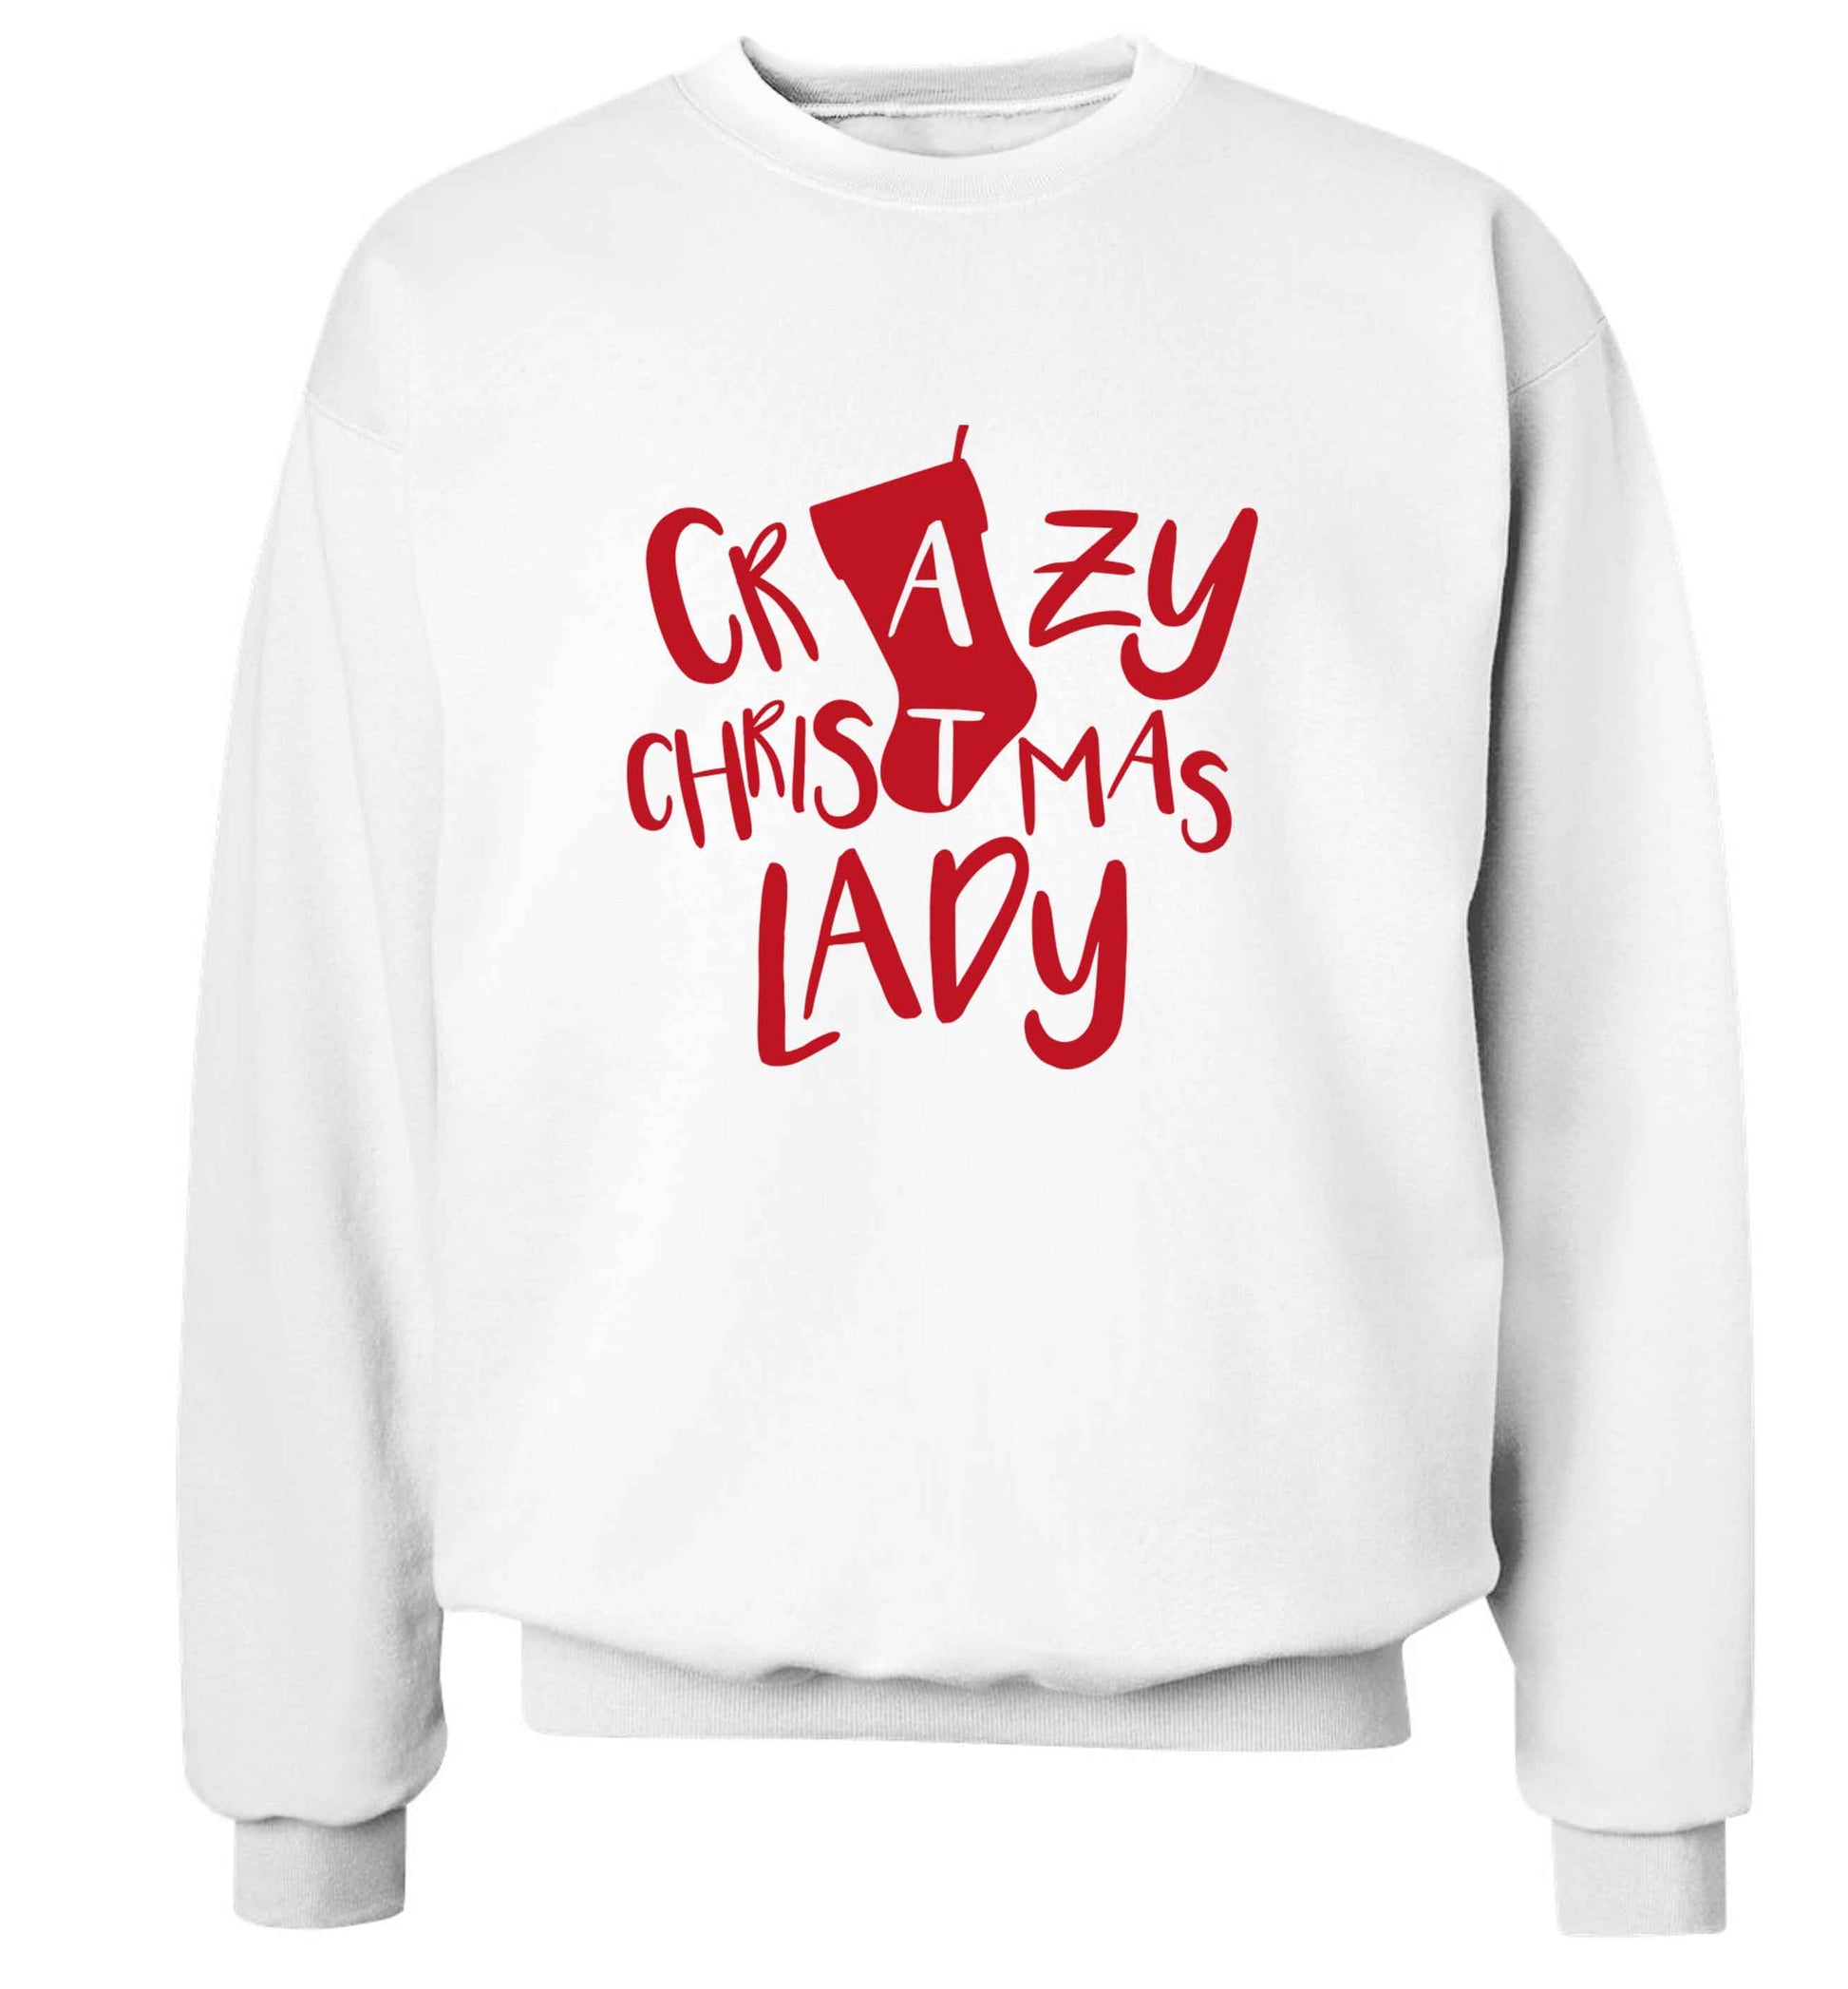 Crazy Christmas Dude adult's unisex white sweater 2XL